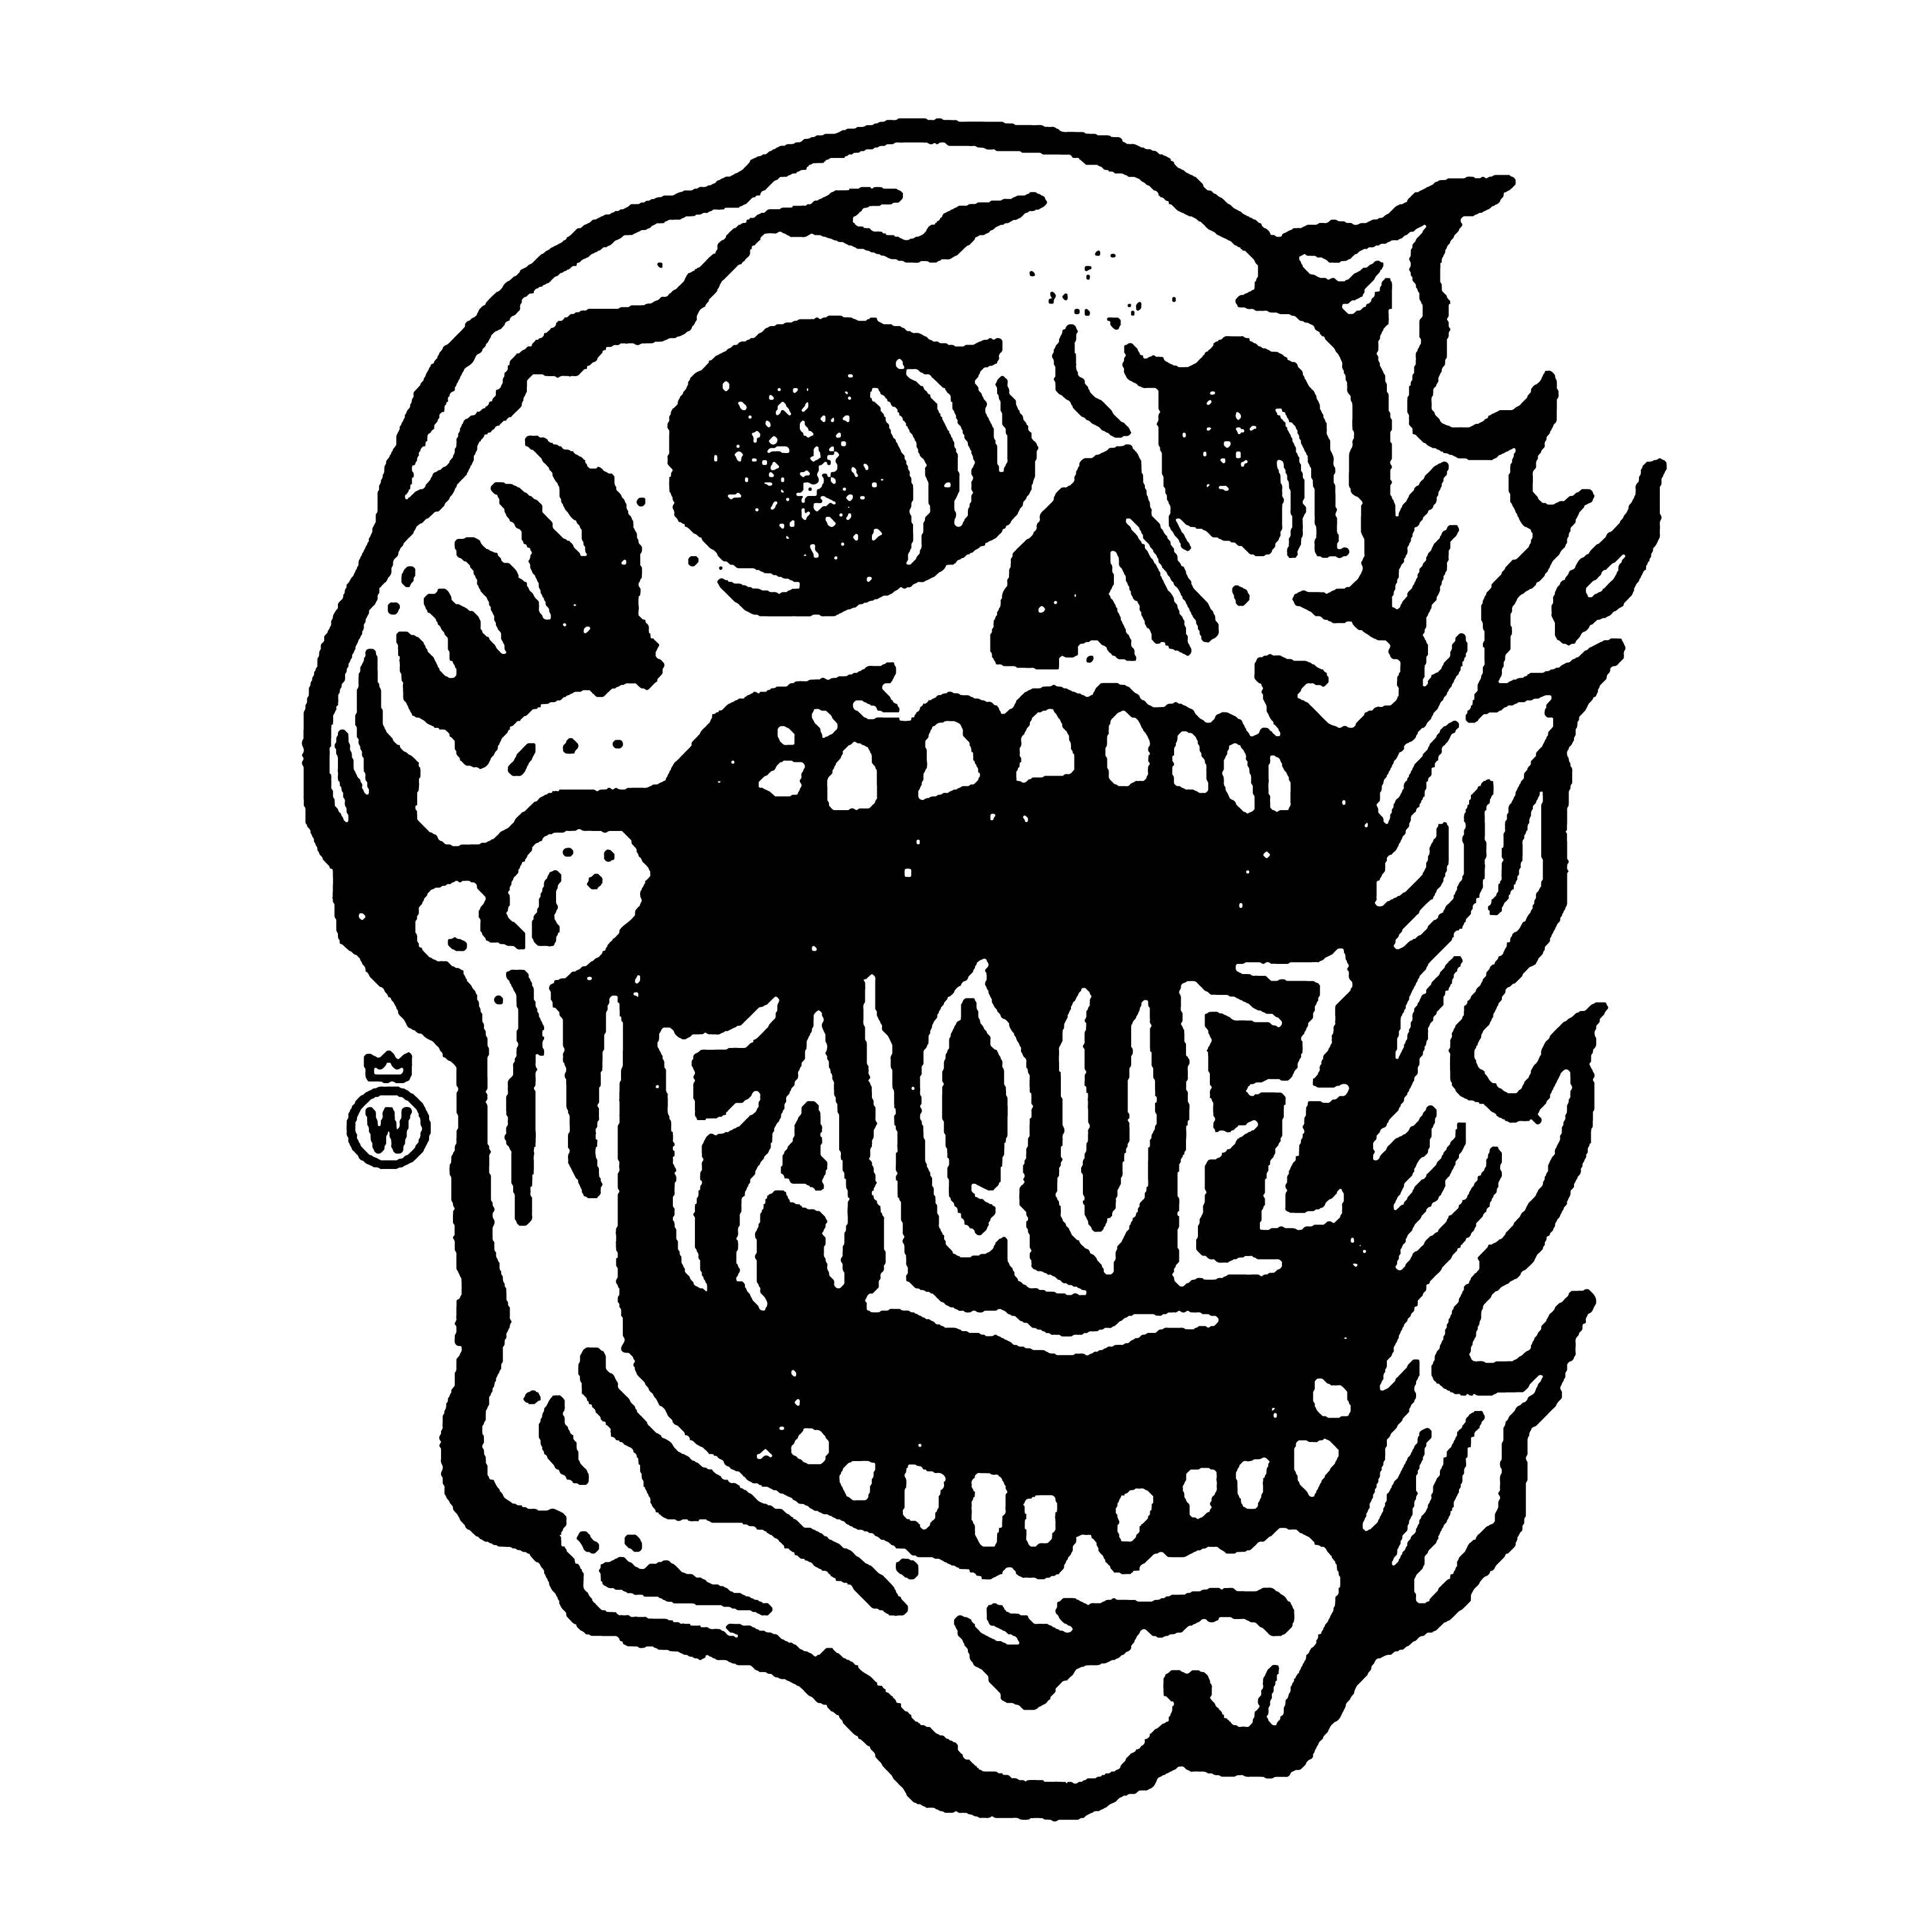 Falquez is a musical project from Miami, Florida led by Colombian-American musician Daniel Falquez, known for its genre-blending sound that encompasses elements of alternative rock, shoegaze, and power pop.